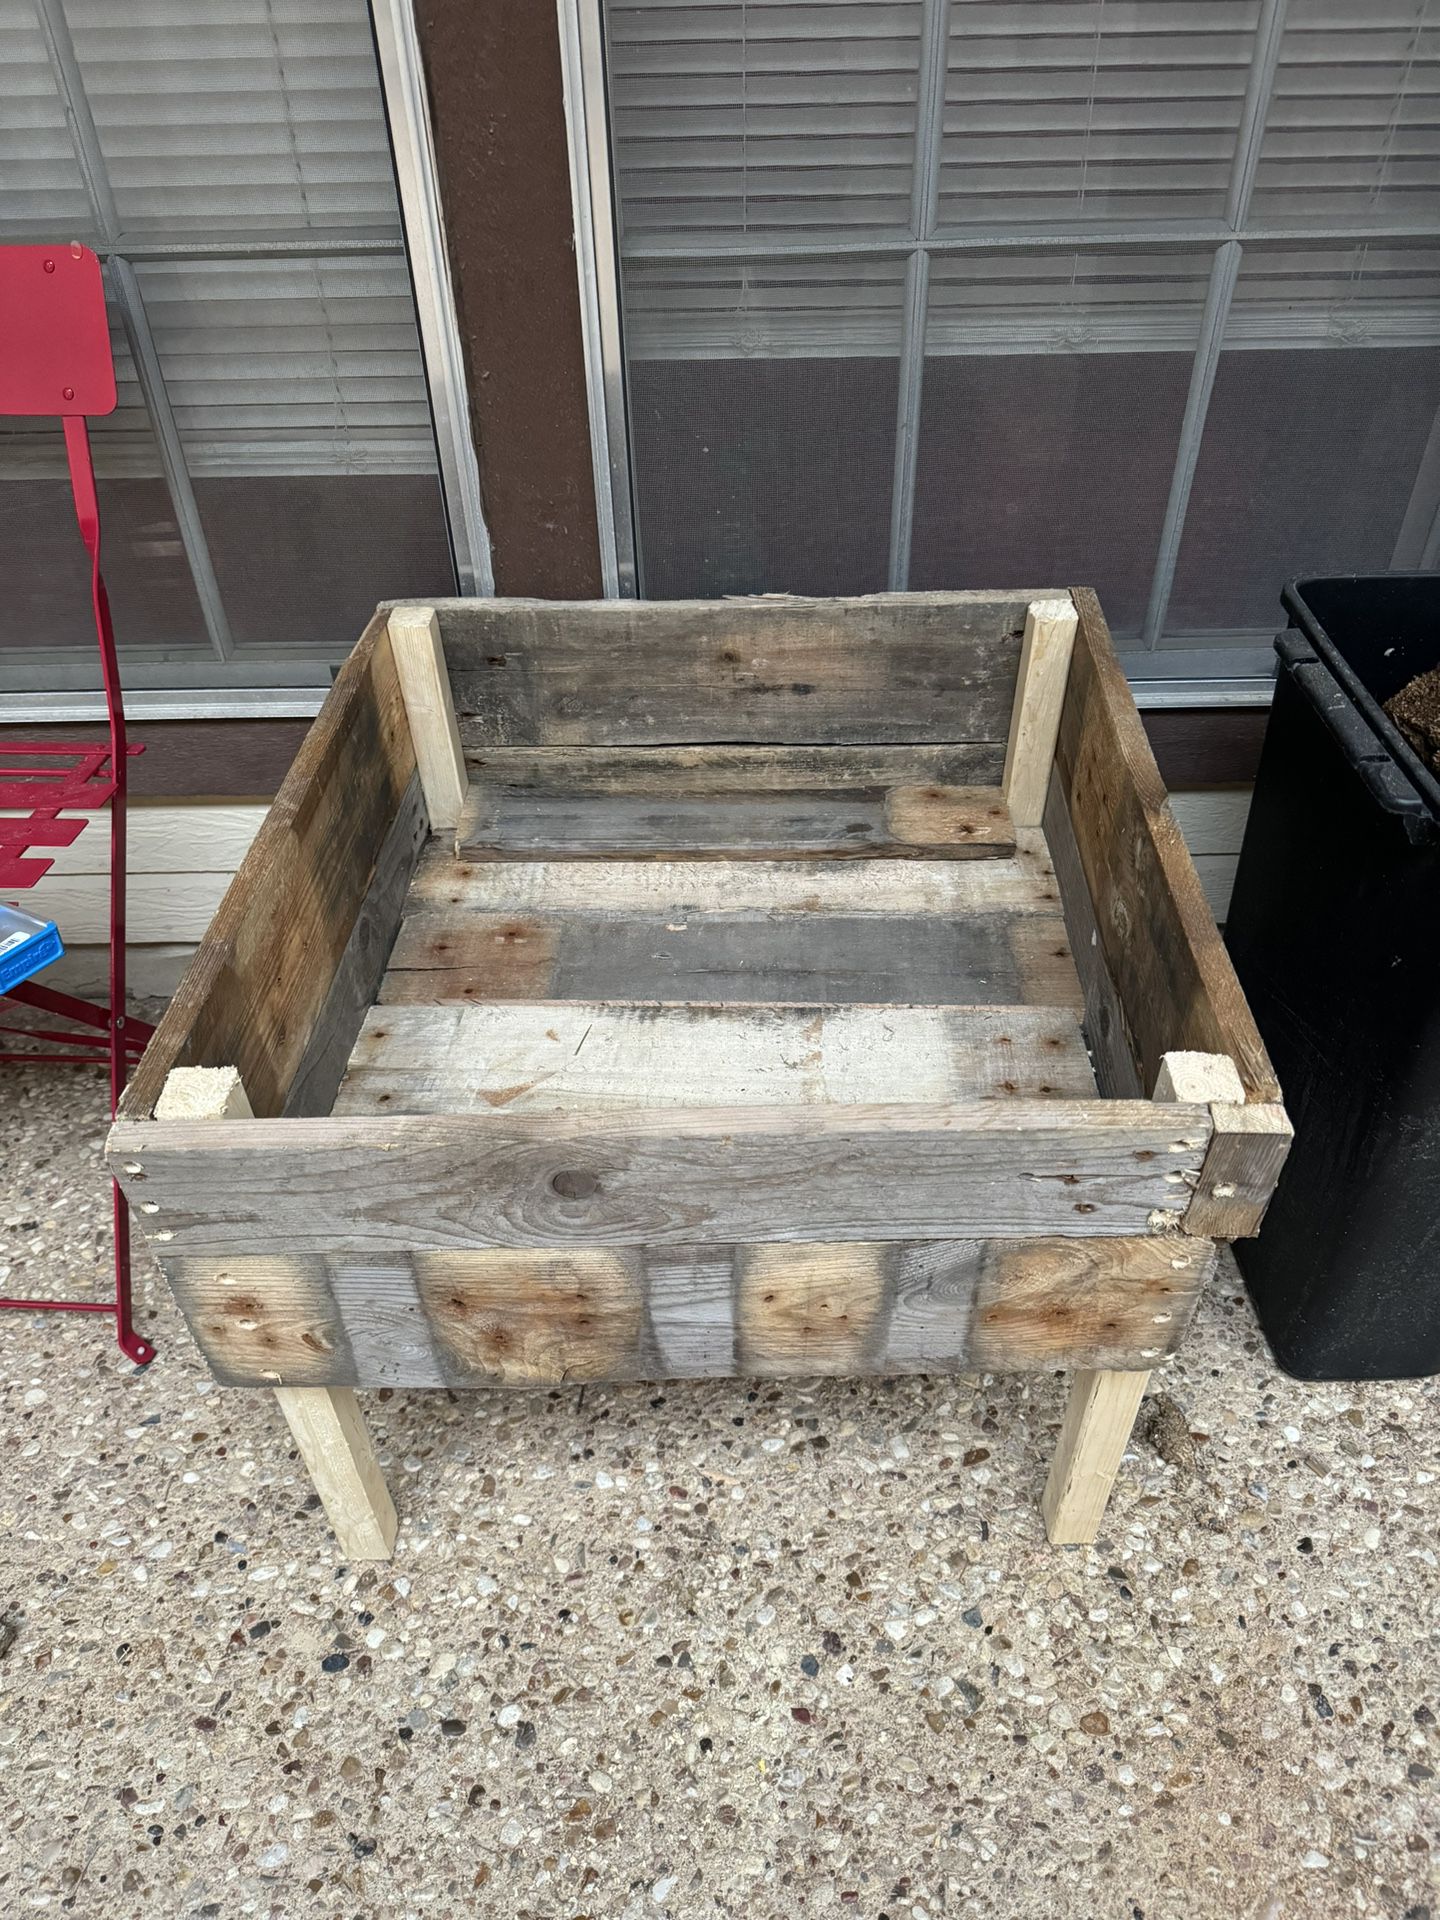 Up-Cycled Garden Planter